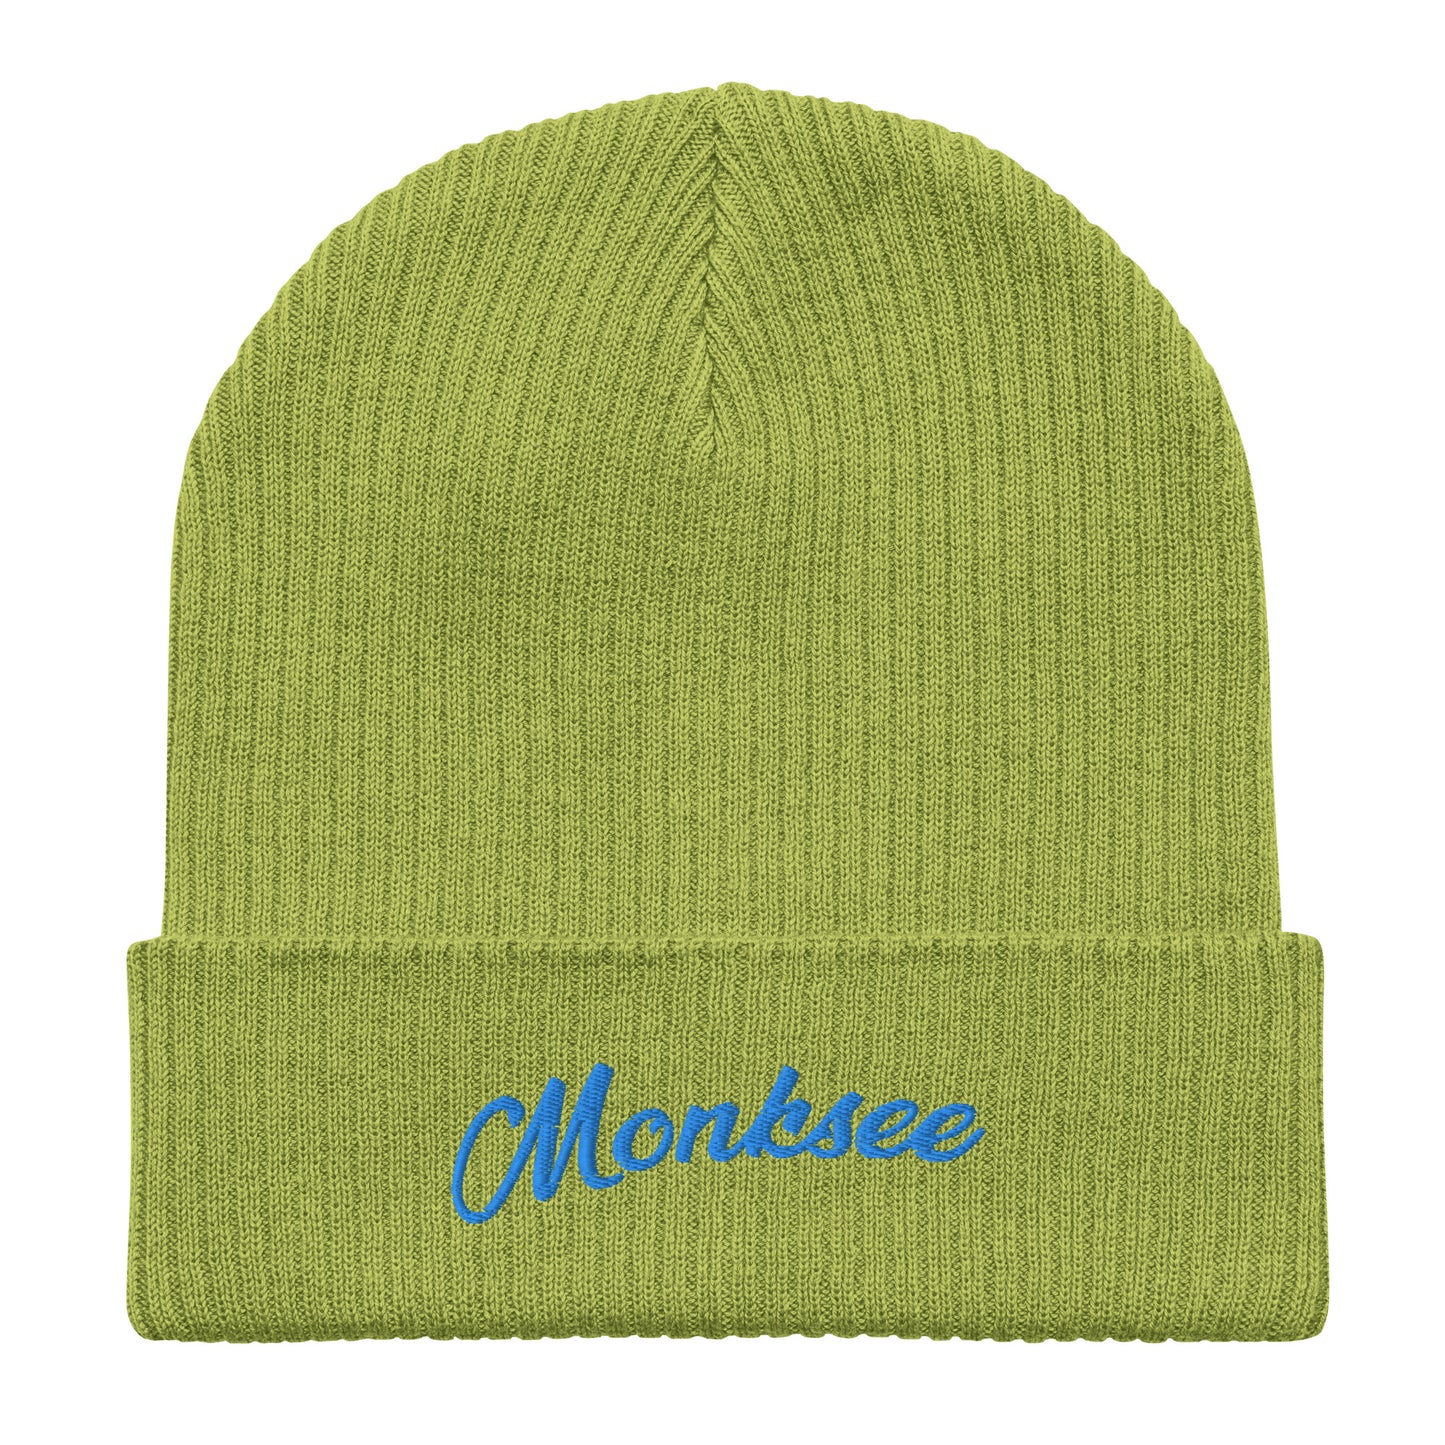 Lime Organic ribbed beanie by Monksee